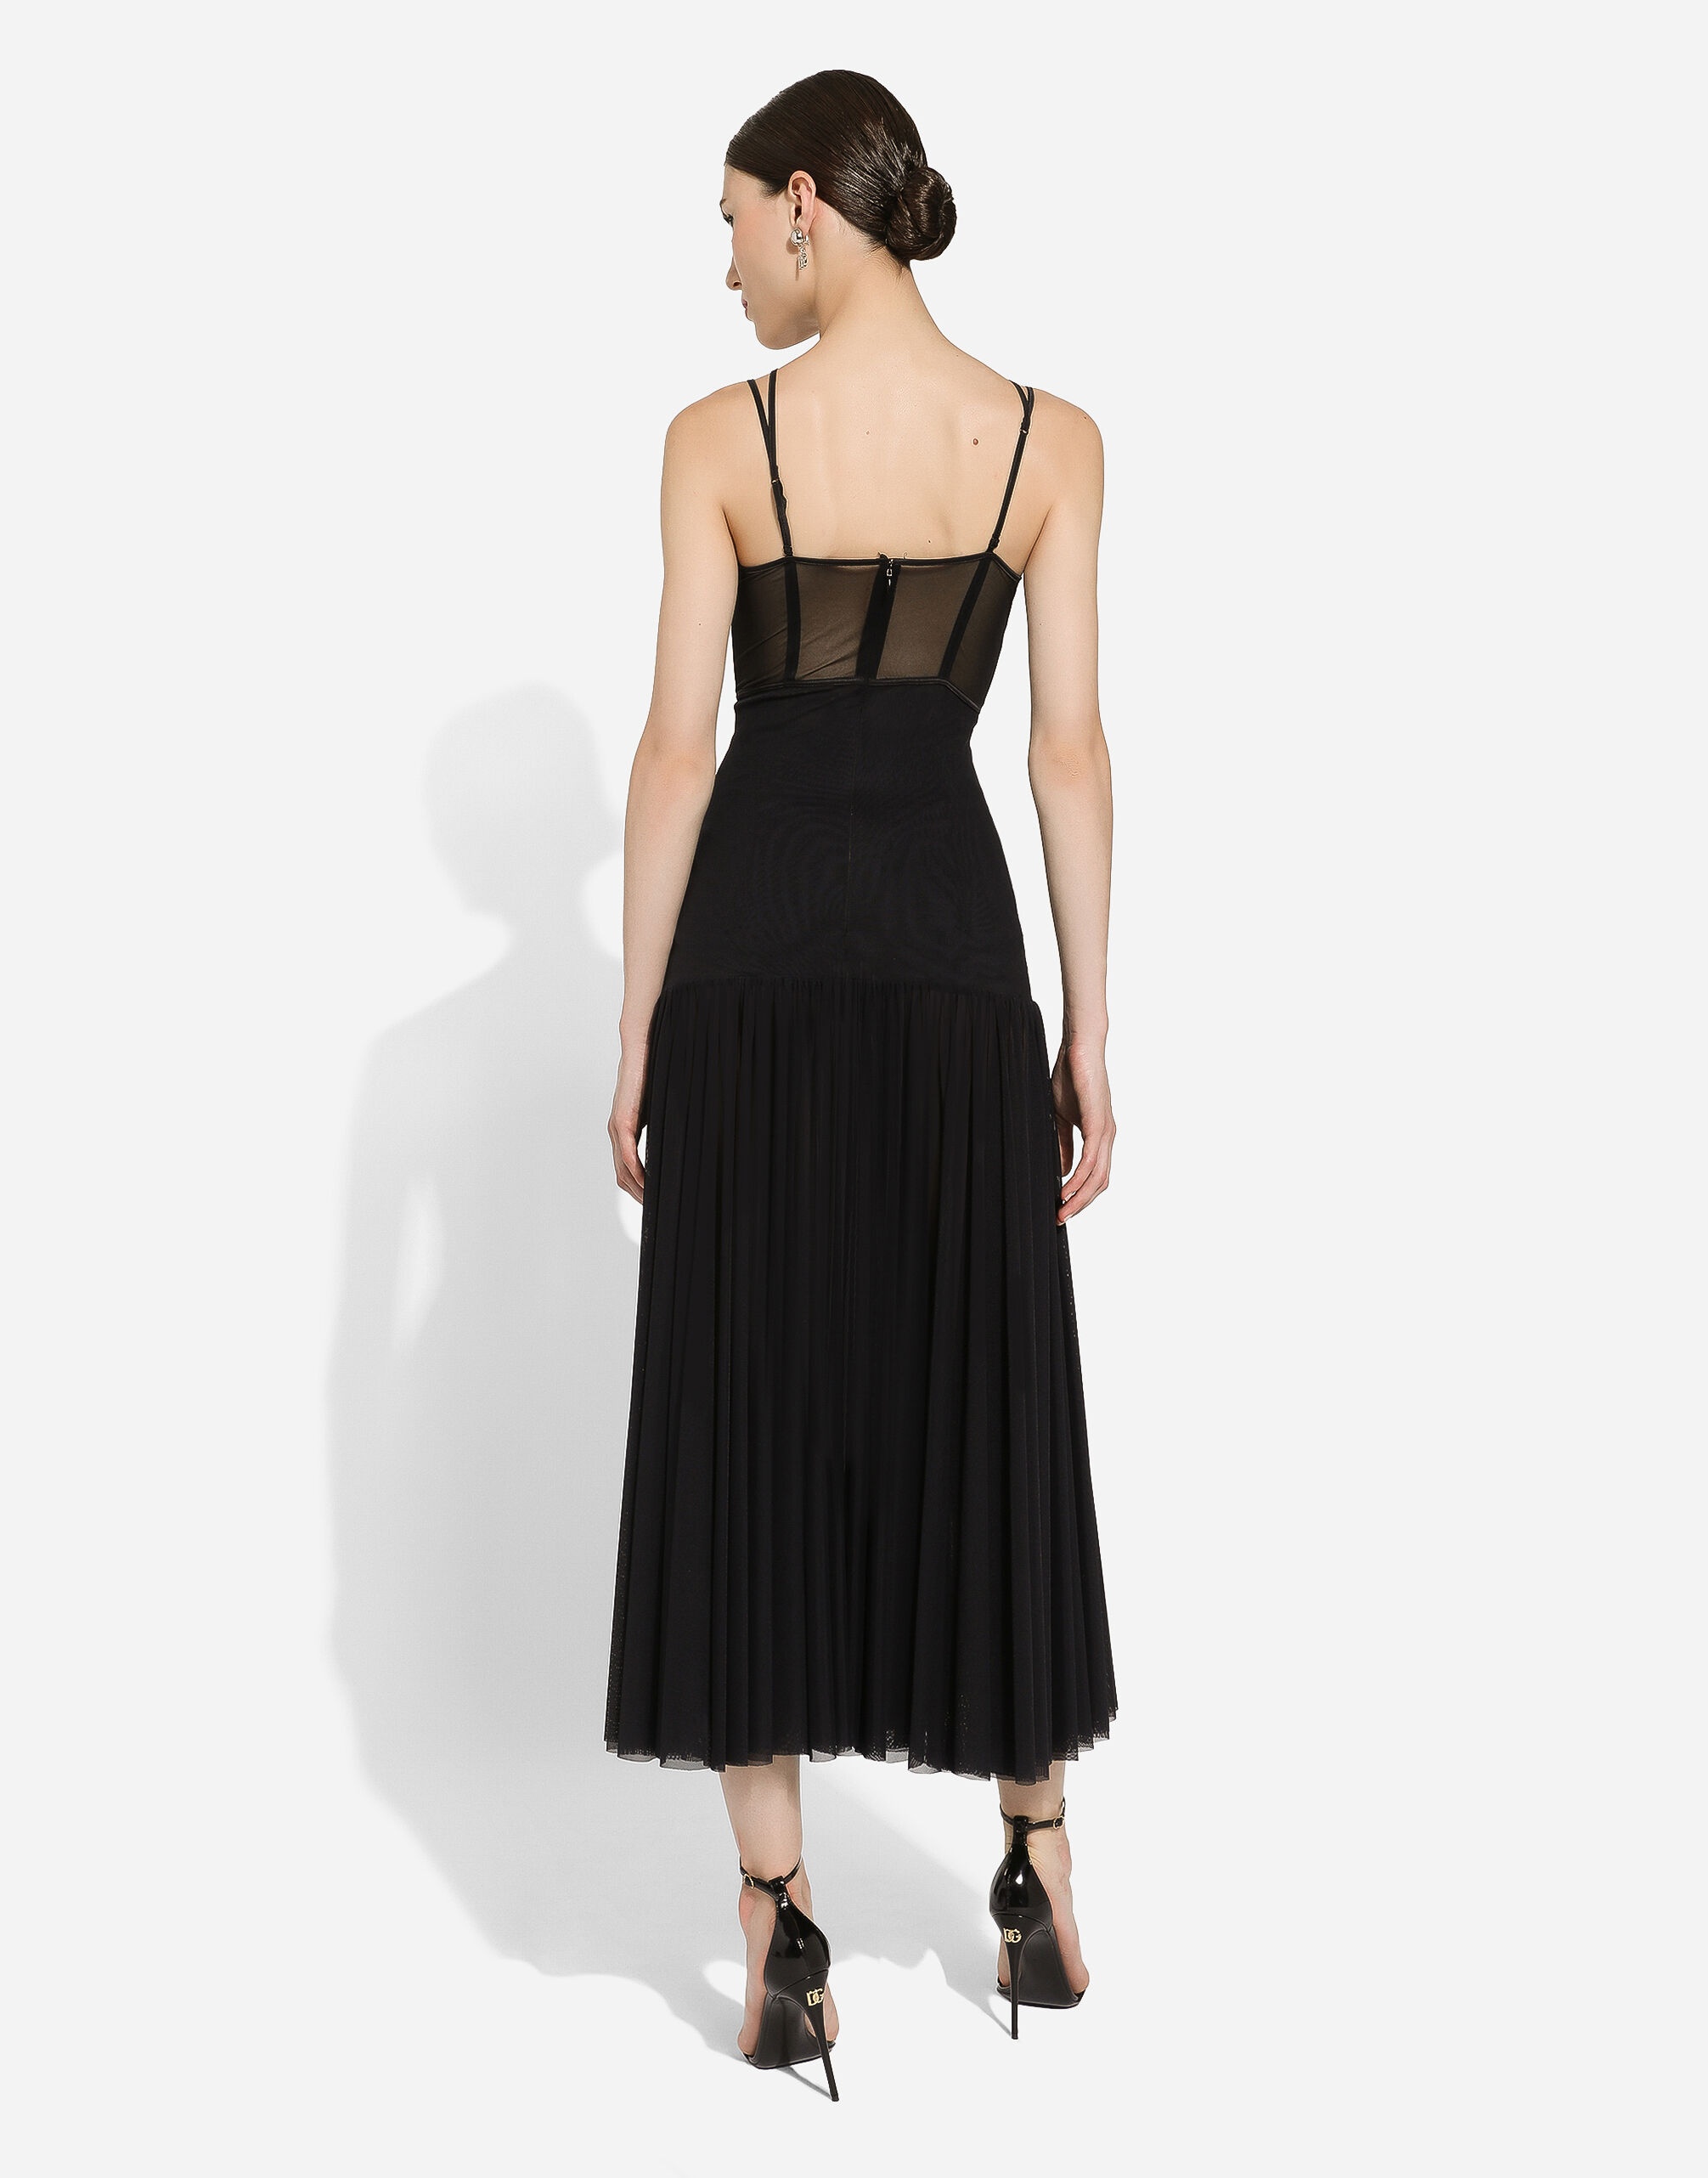 Tulle midi dress with lingerie details and the DG logo - 3